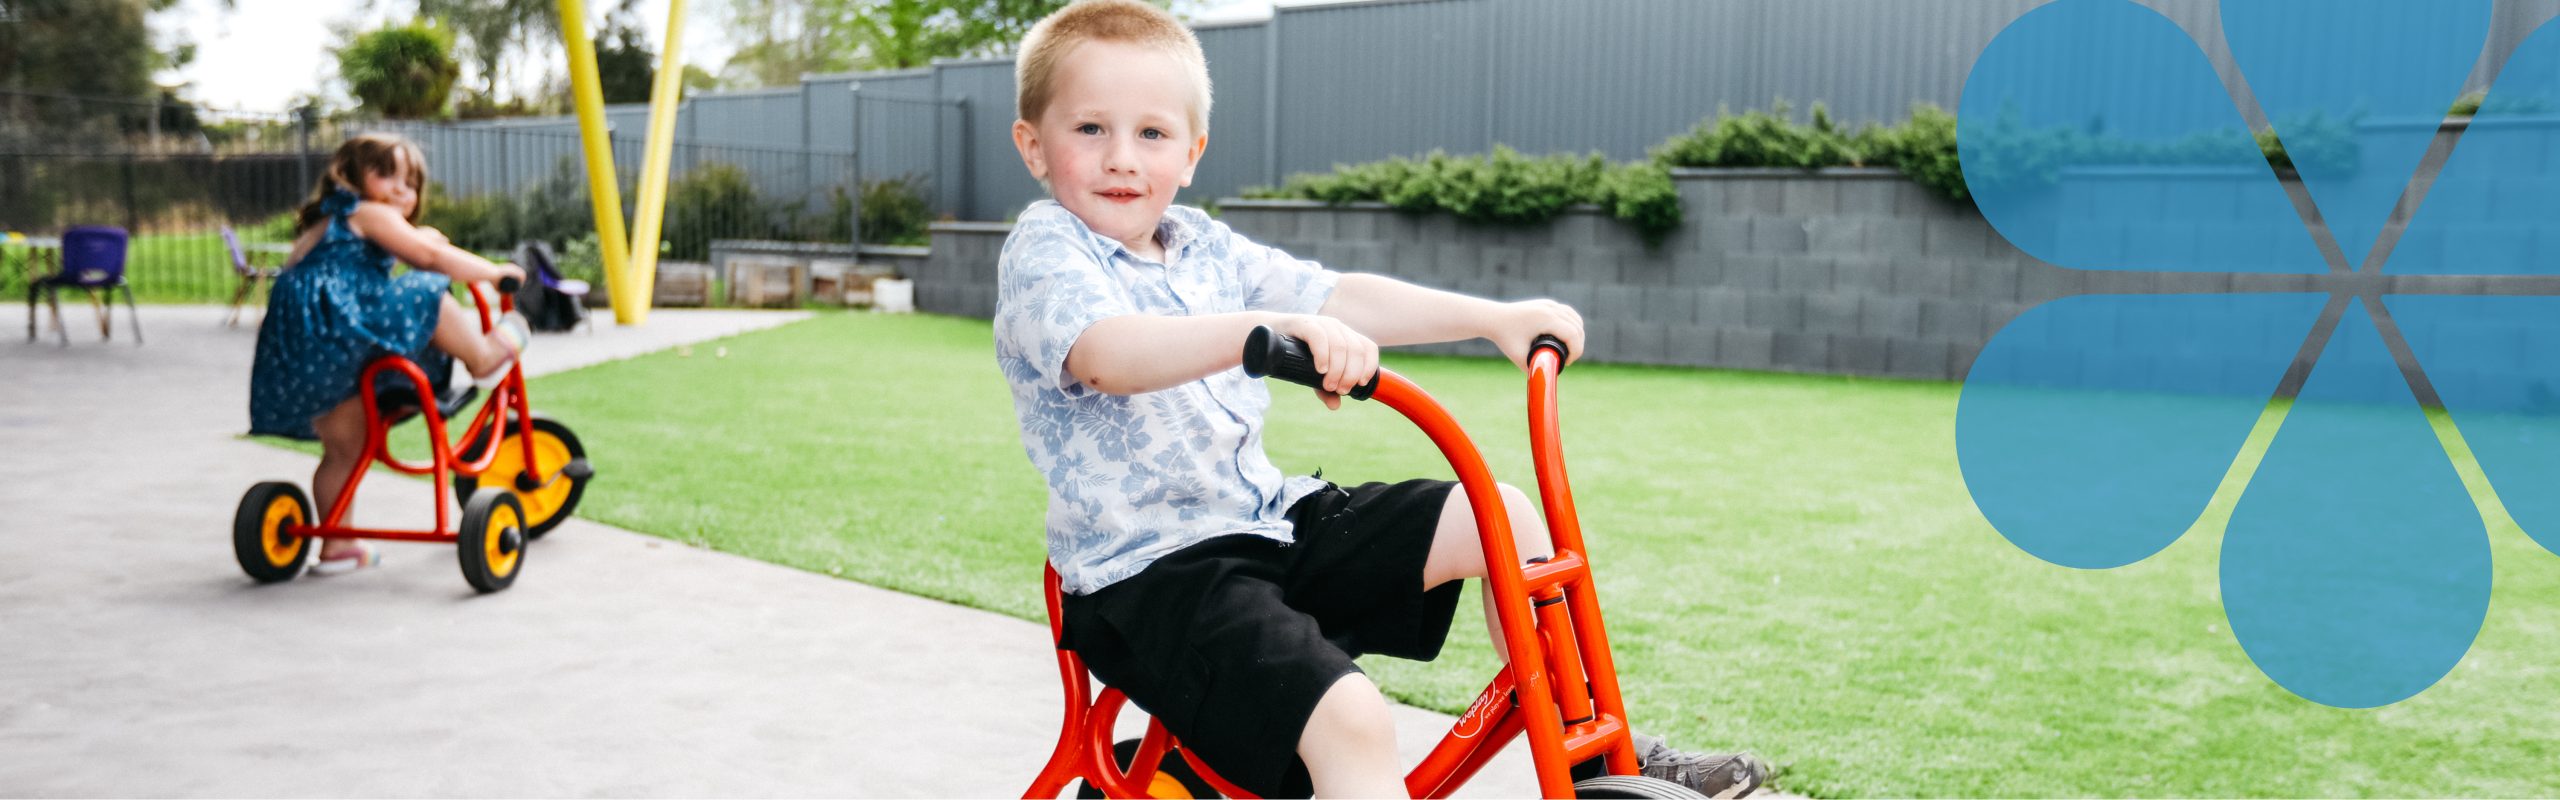 young child riding a red bike